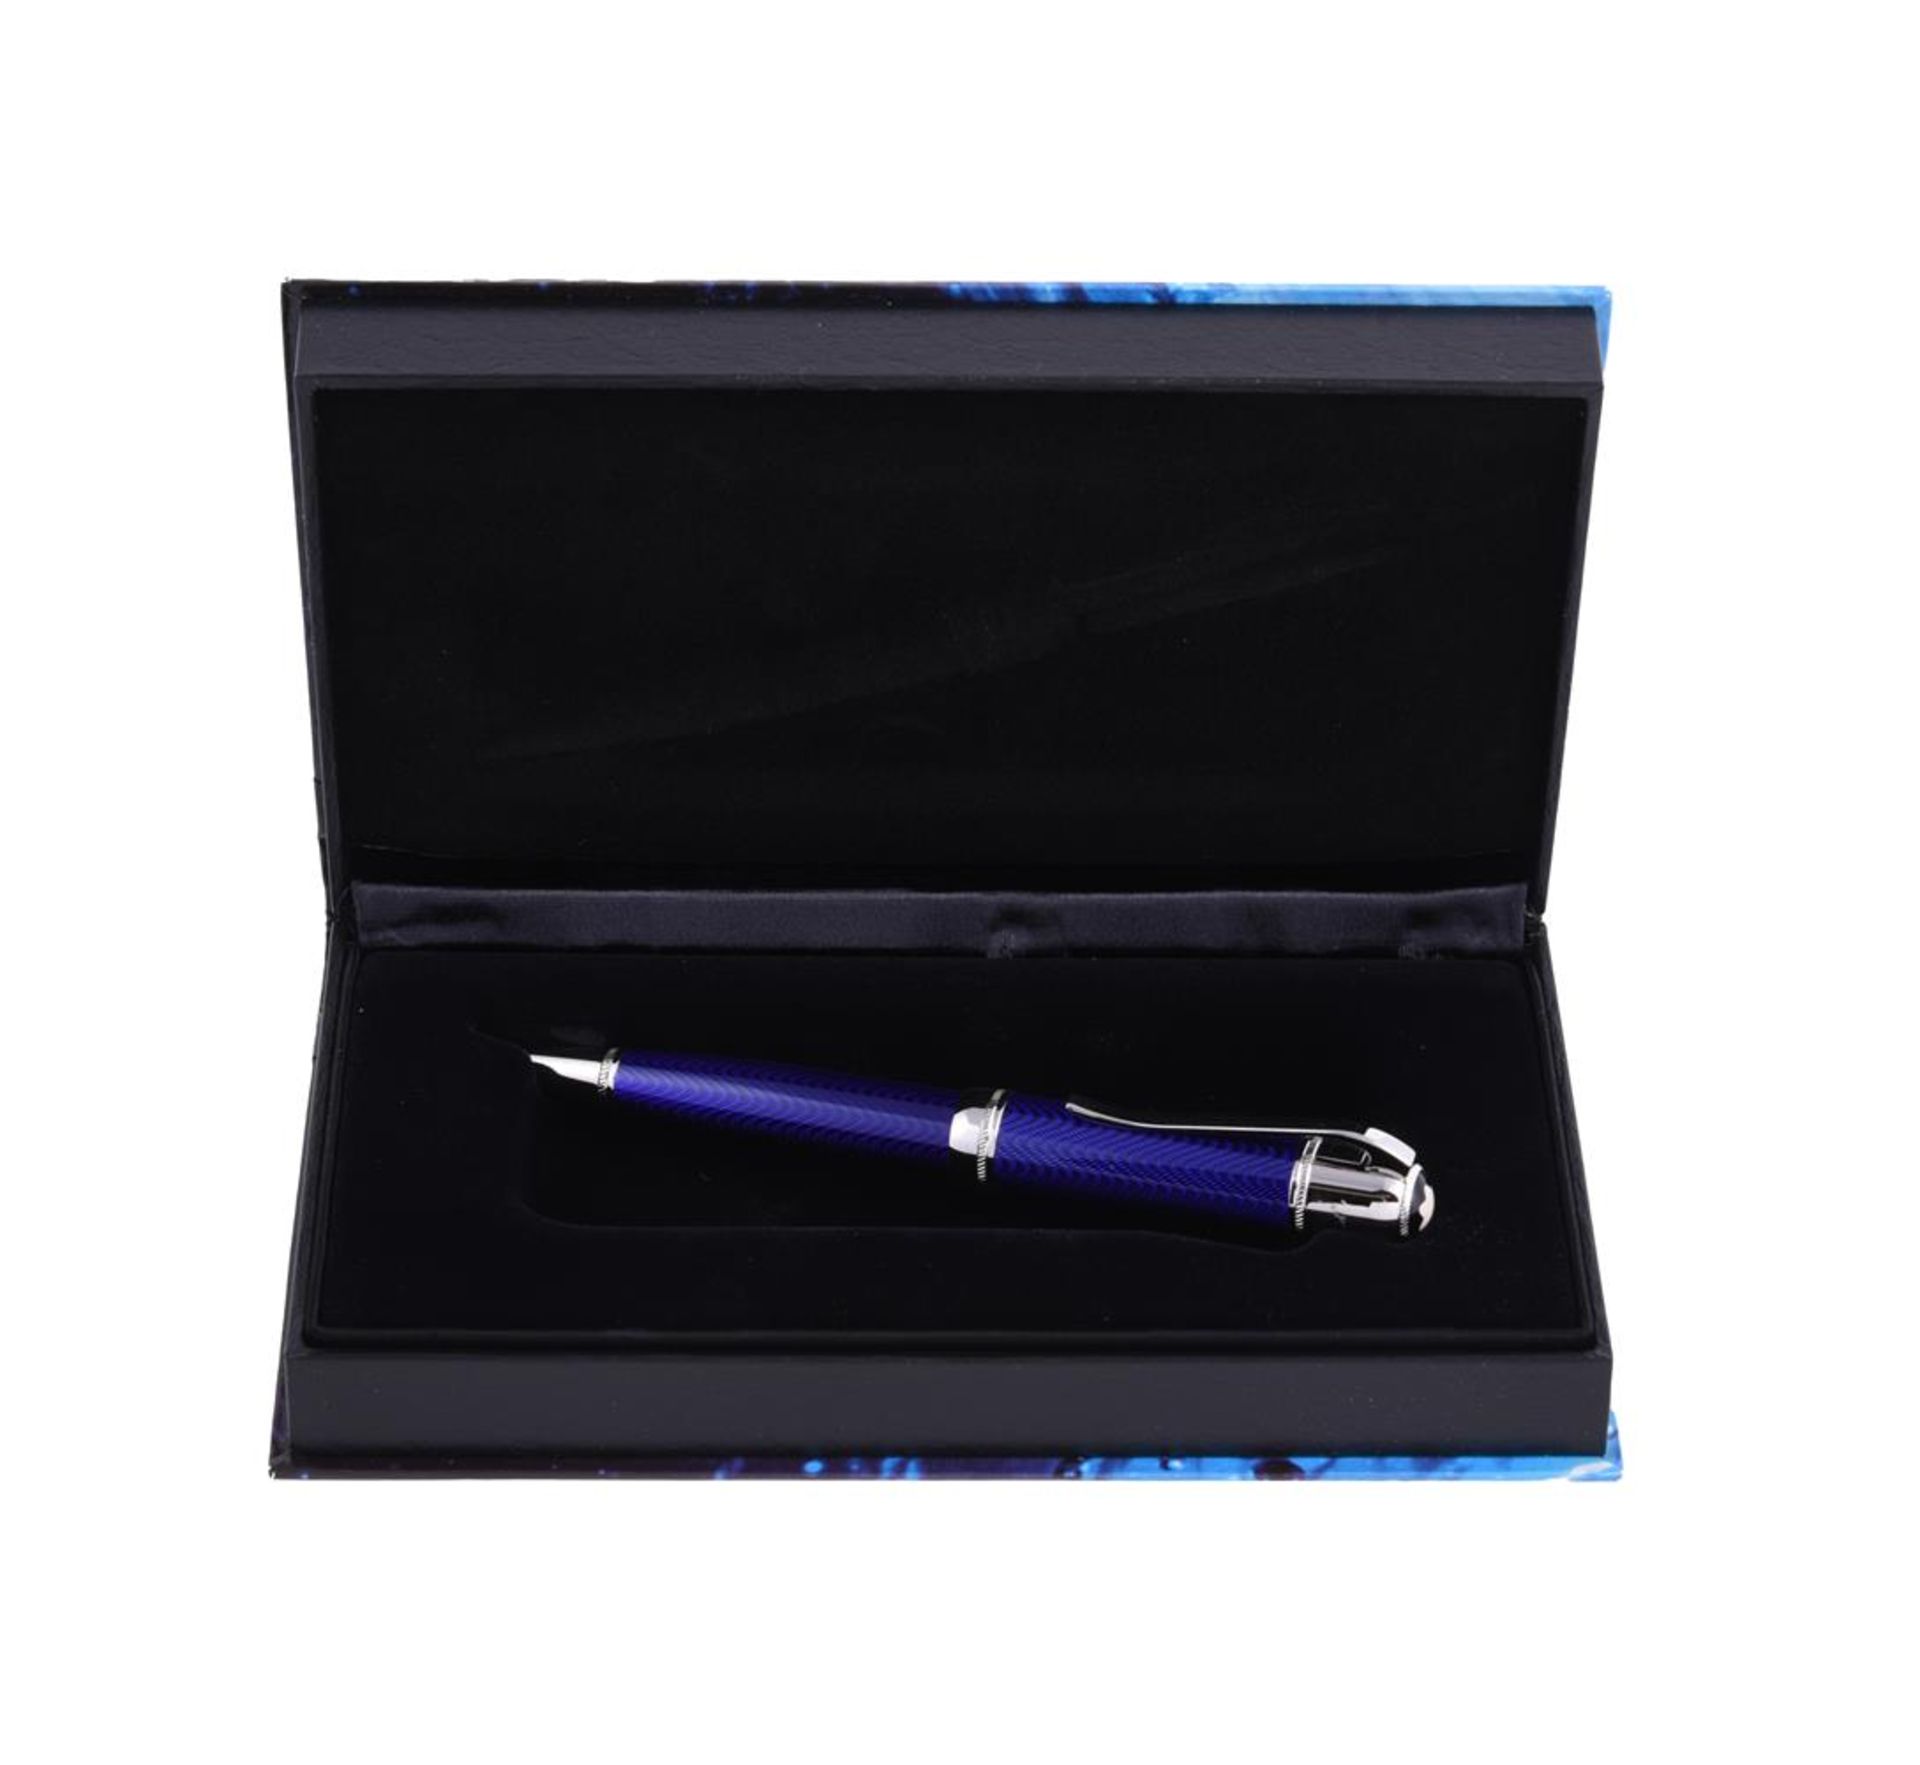 MONTBLANC, WRITERS EDITION, JULES VERNE, A LIMITED EDITION BALLPOINT PEN - Image 2 of 2